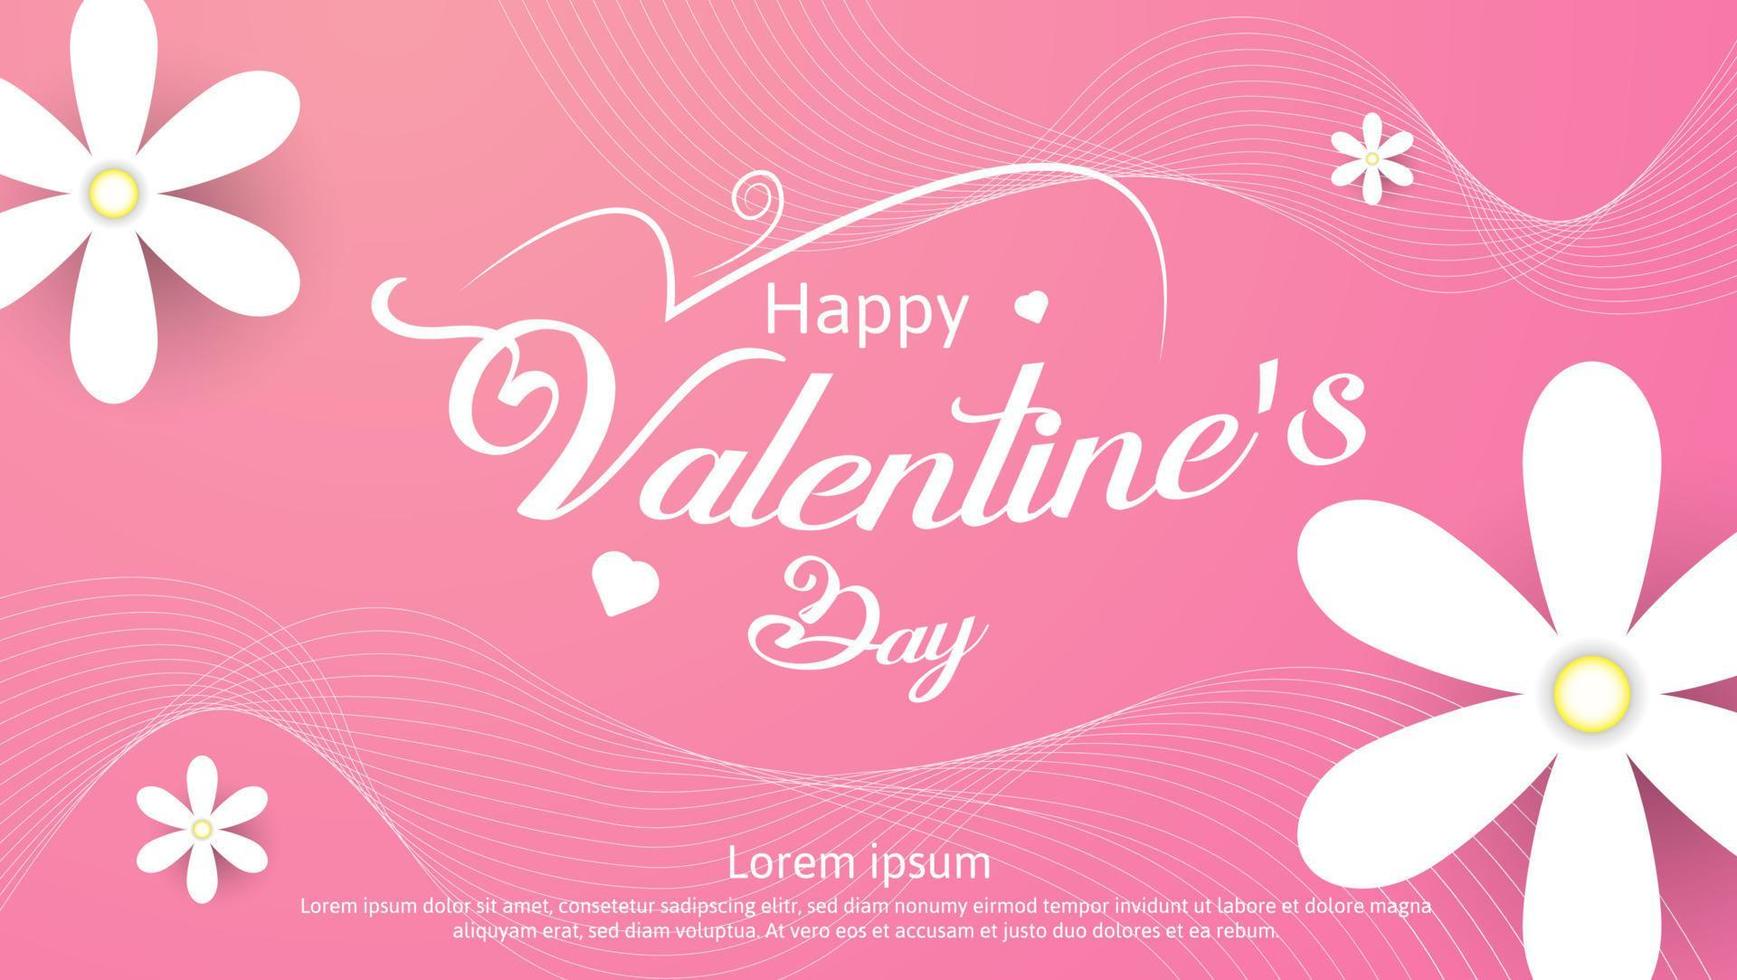 happy valentine's day background or postcard with flower and heart shapes on pink background vector